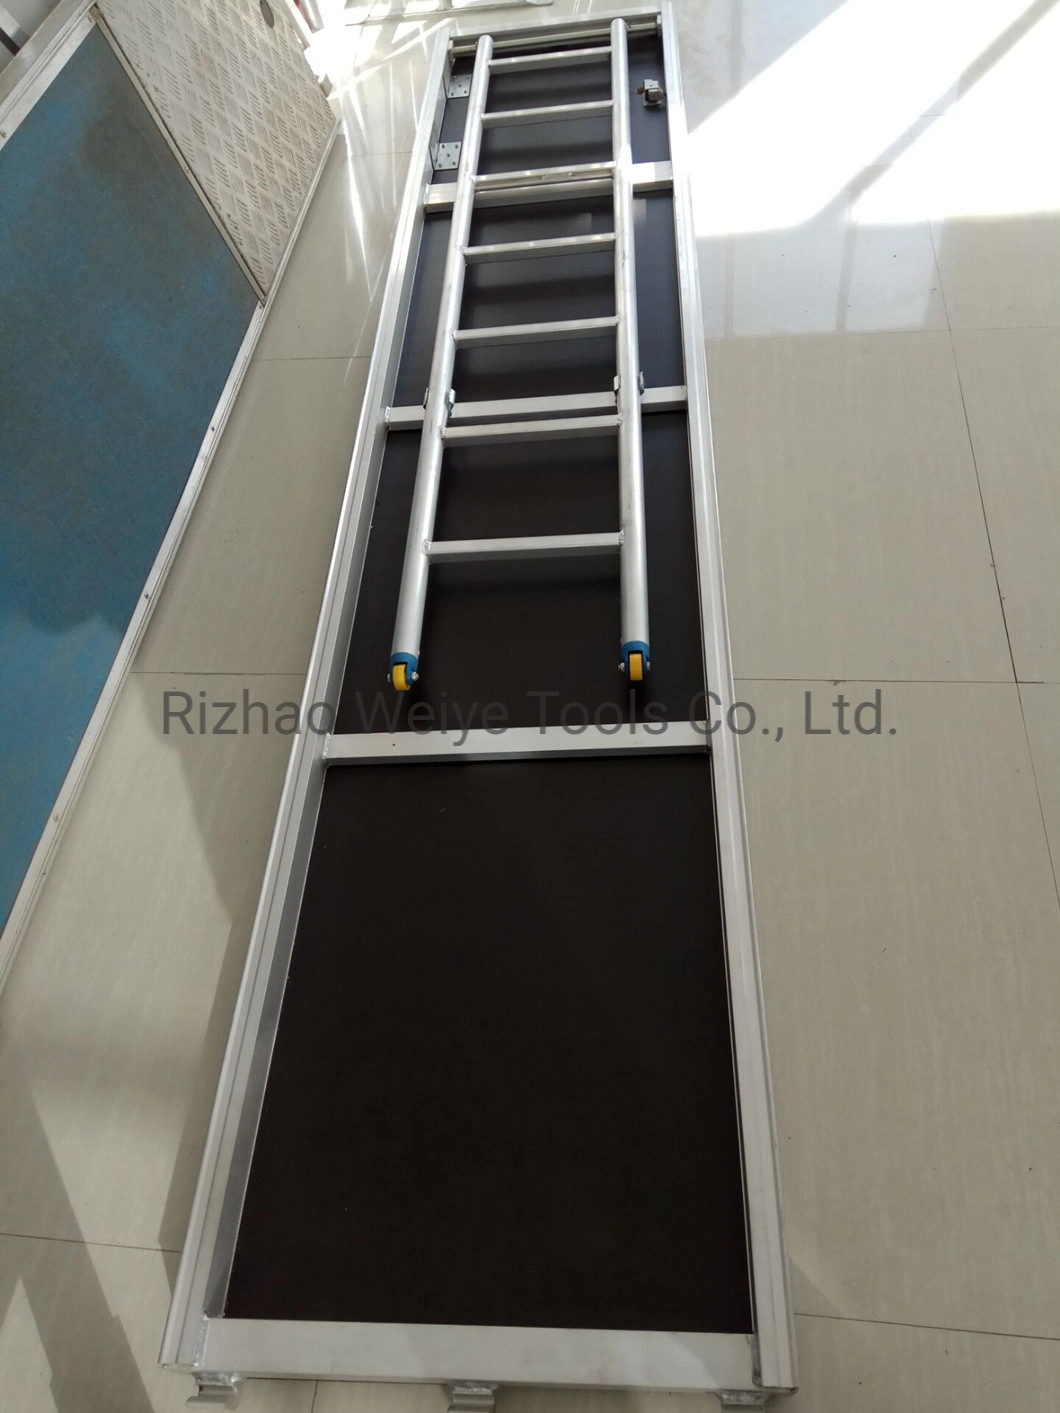 Scaffold Deck Aluminum Plywood Trapdoor Plank with Ladder